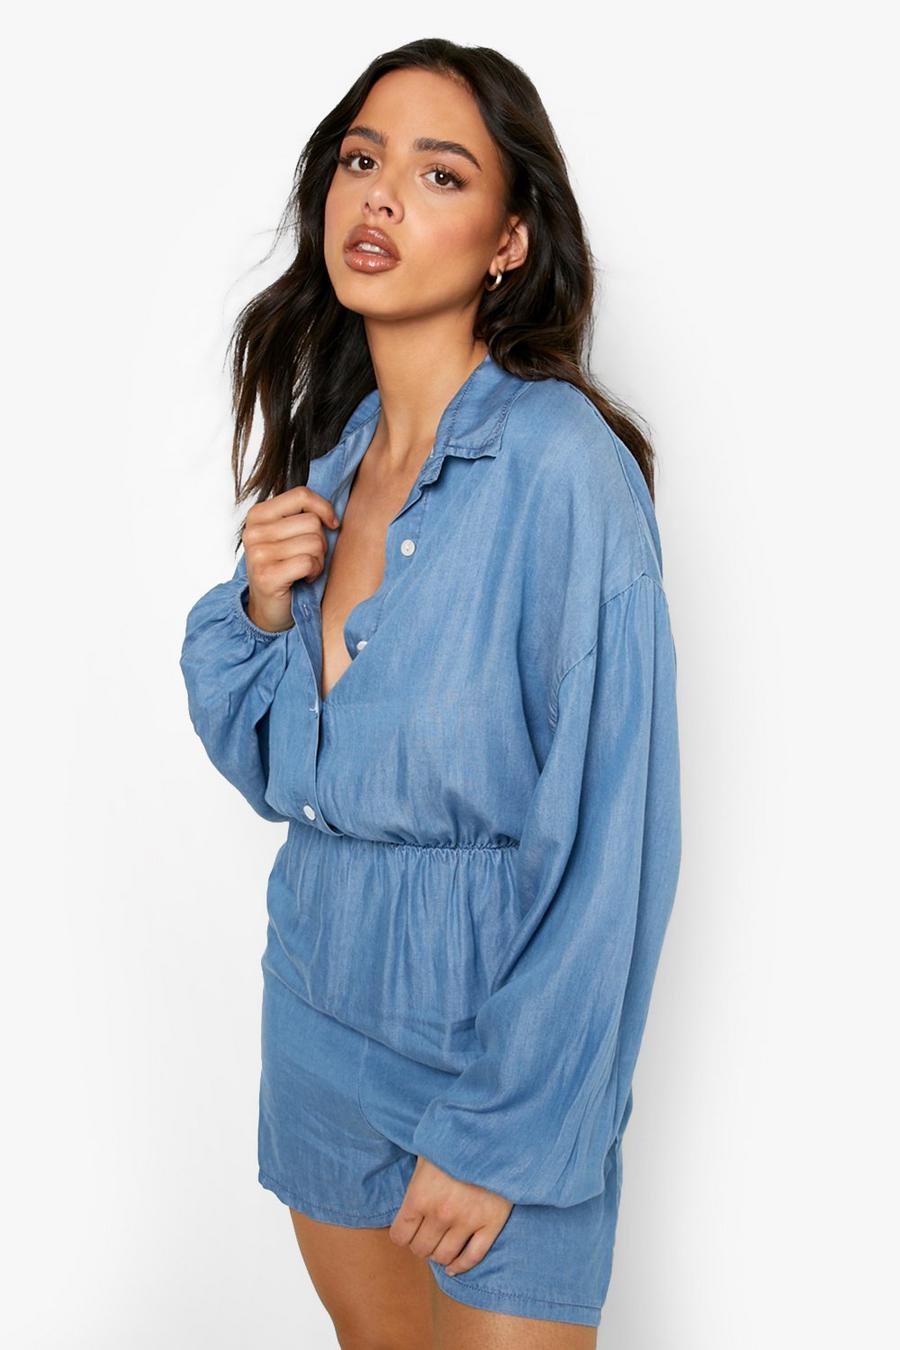 Blue Boohoo Zip Up Drawcord Denim Romper in Light Wash Womens Jumpsuits and rompers Boohoo Jumpsuits and rompers 